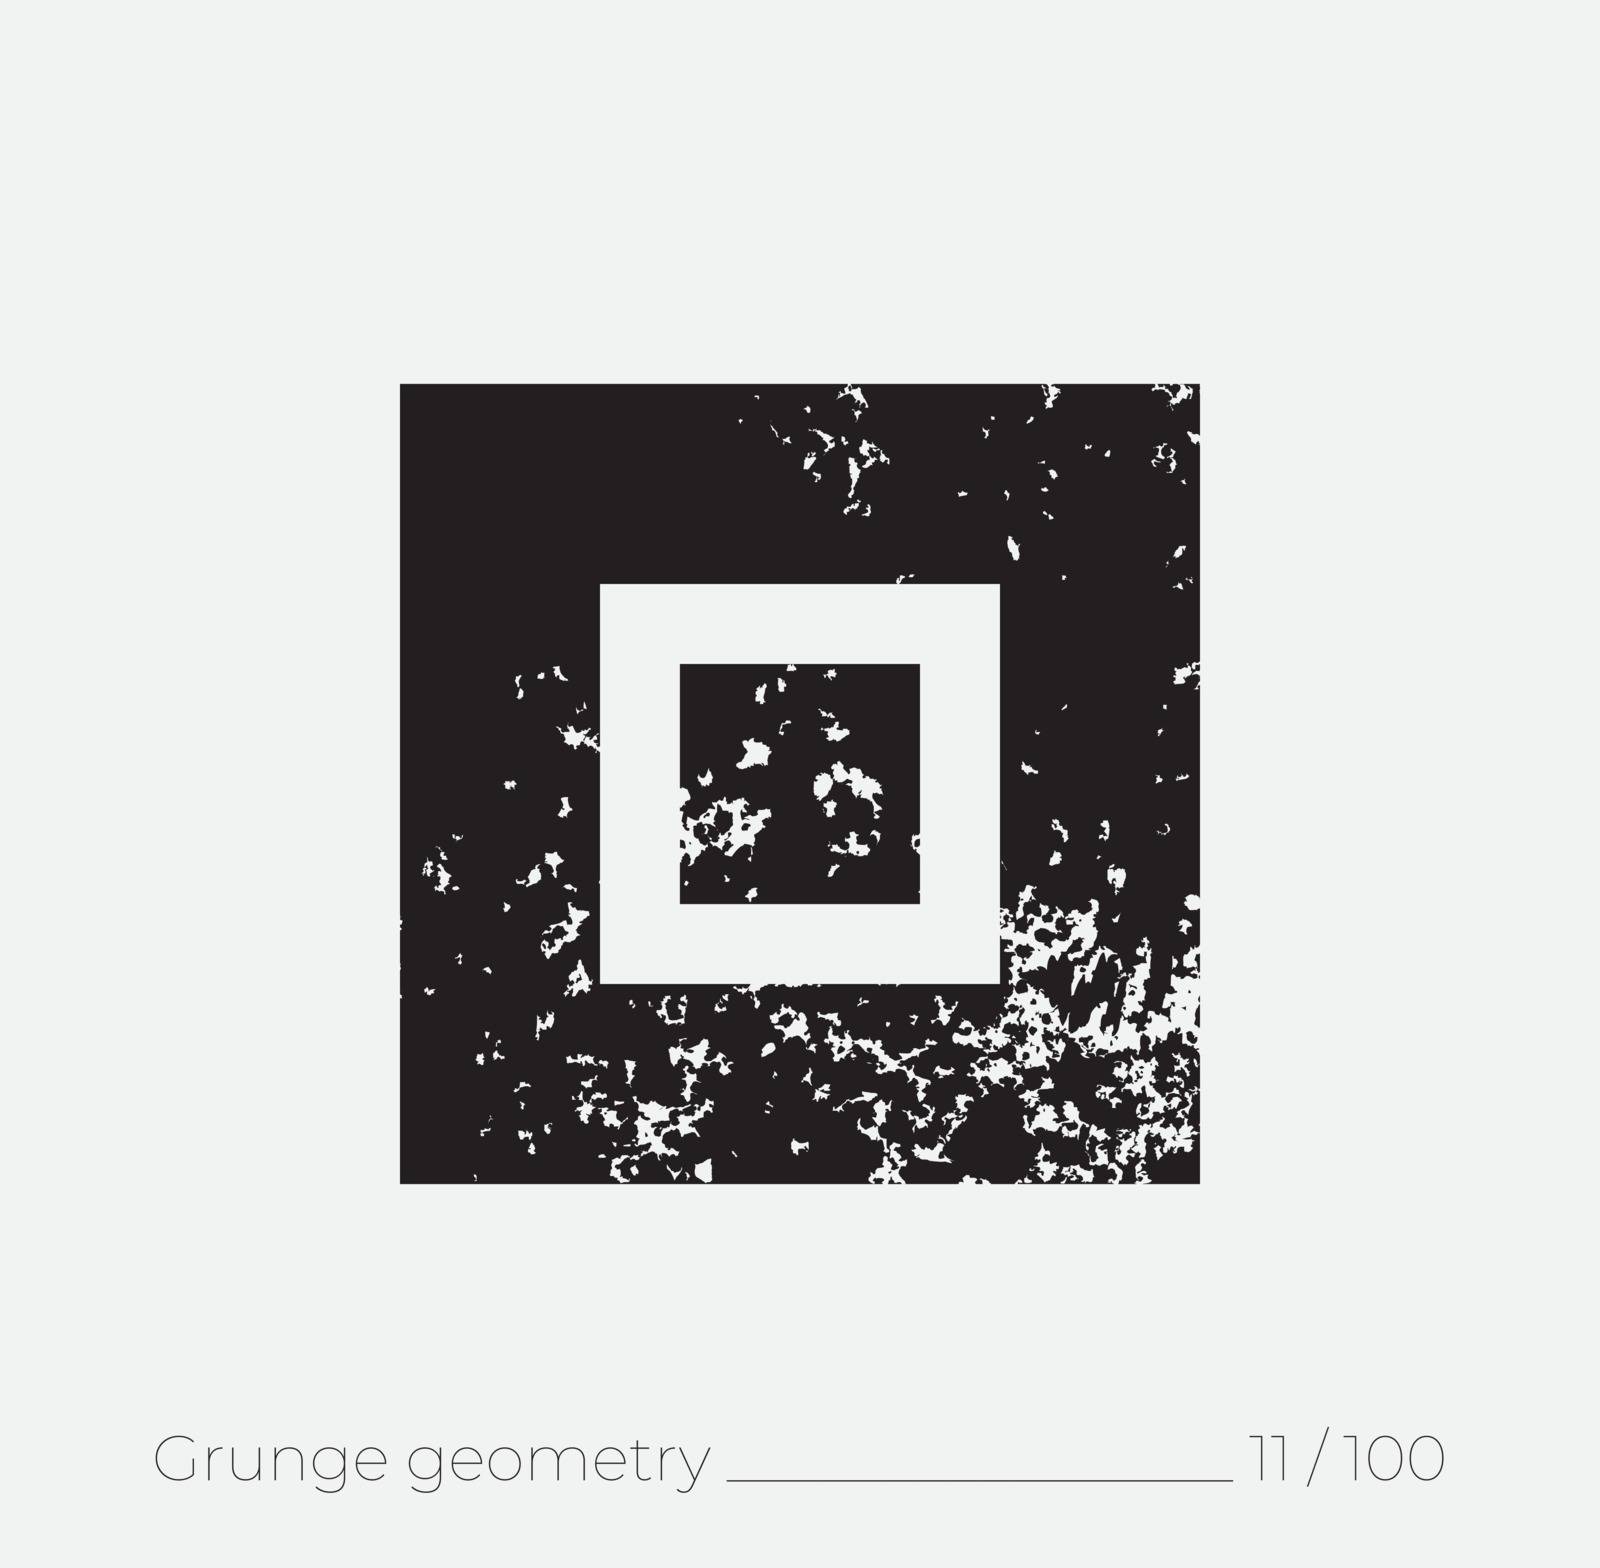 Geometric simple shape in grunge retro style by Vanzyst